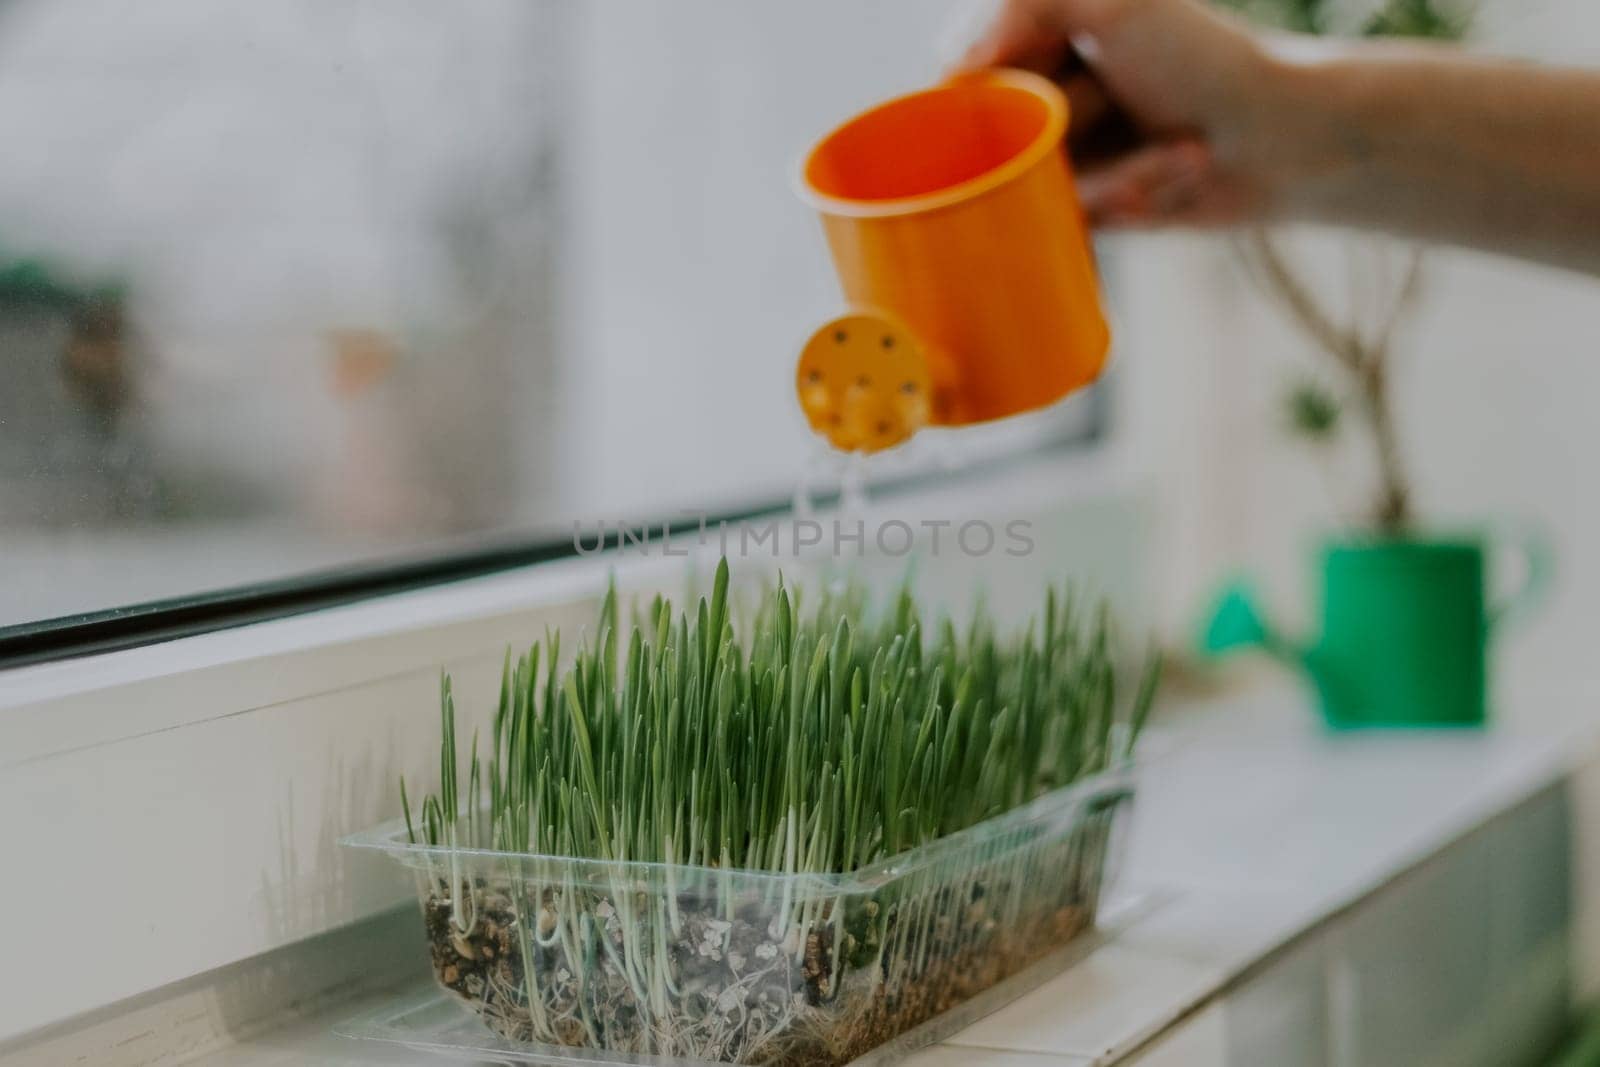 Sprouted oats with water drops in a transparent plastic container stand on a white tiled windowsill and blurred hand of a person watering with an orange watering can, close-up side view. Gardening concept.